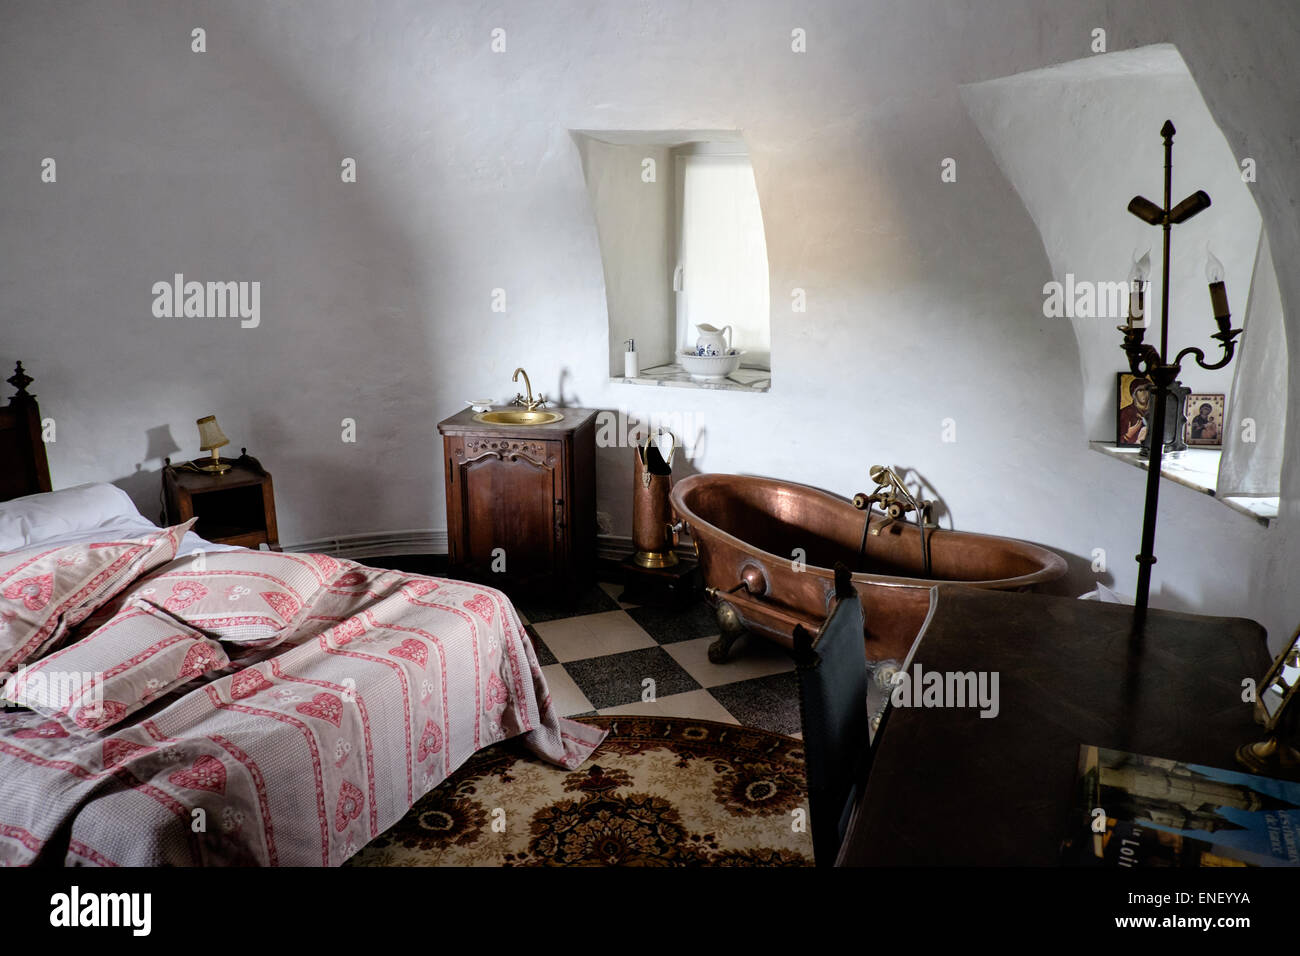 Copper bath tub in old French chateau apartment Stock Photo